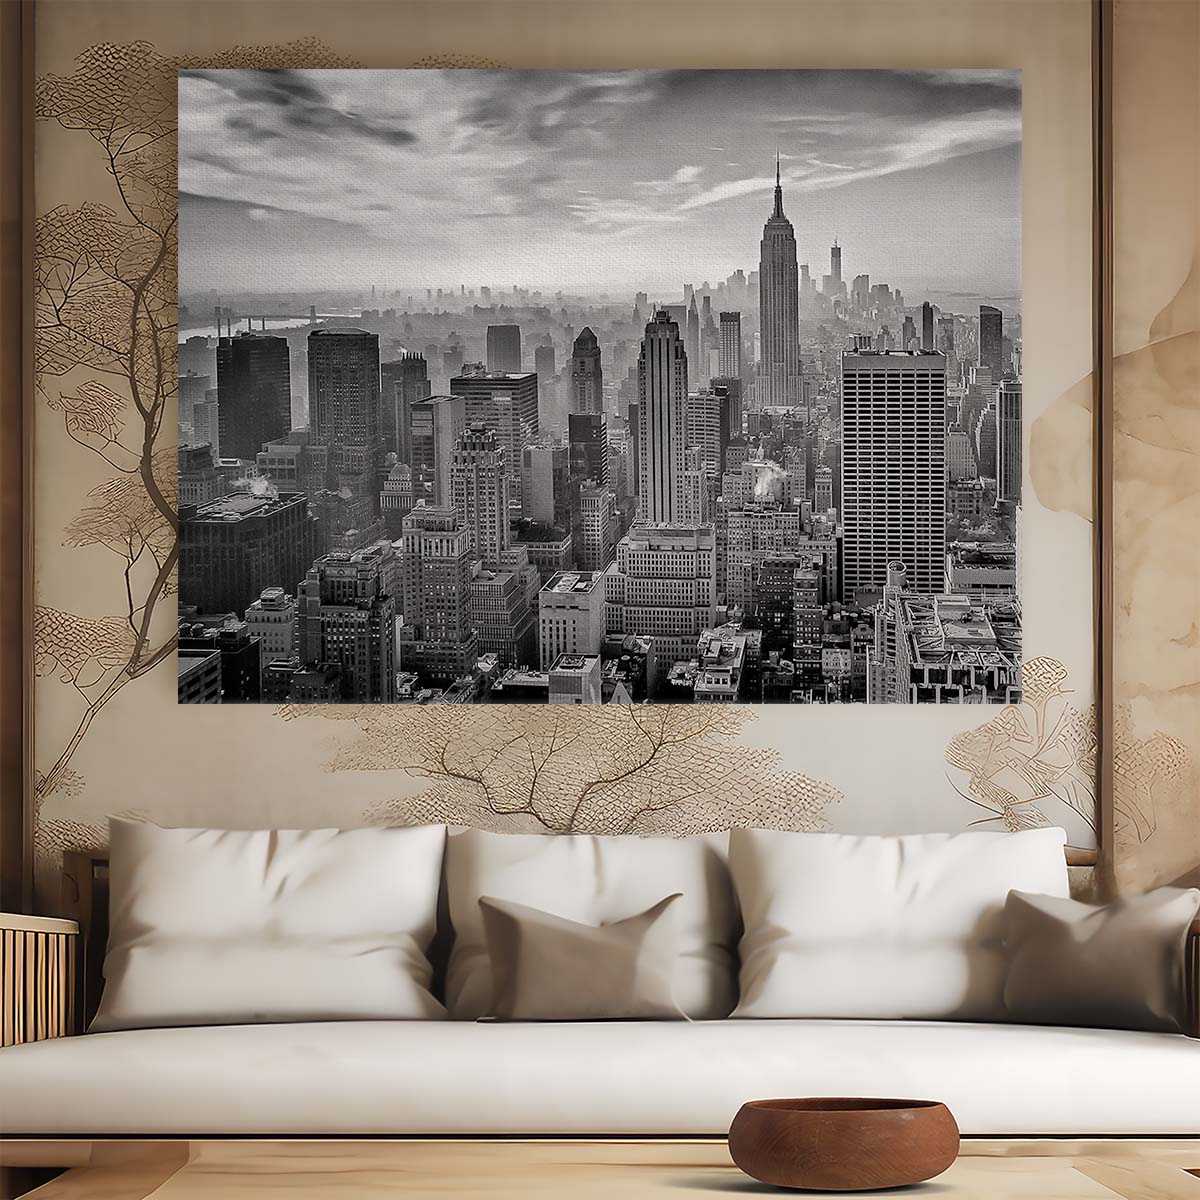 NYC Foggy Skyline Monochrome Cityscape Wall Art by Luxuriance Designs. Made in USA.